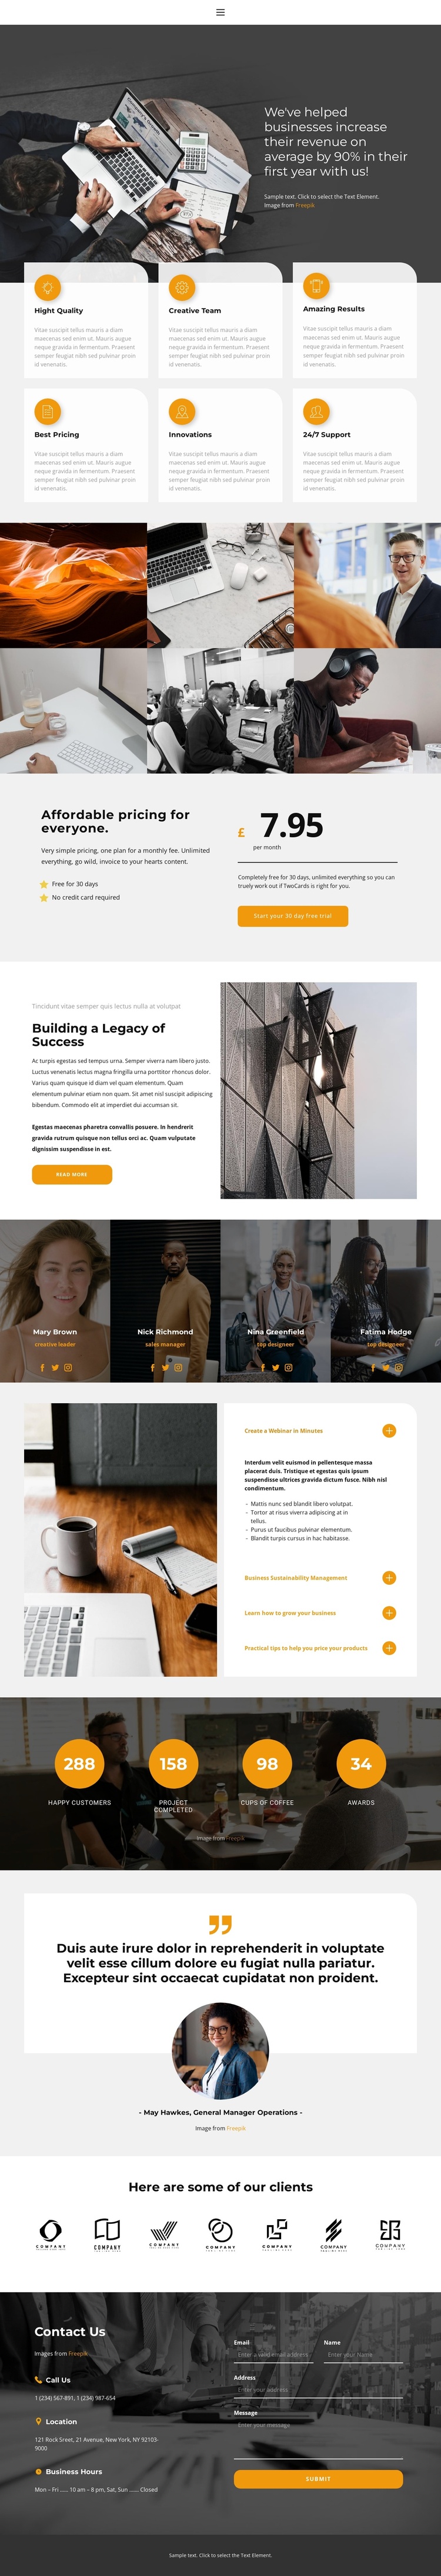 Appointment Joomla Template